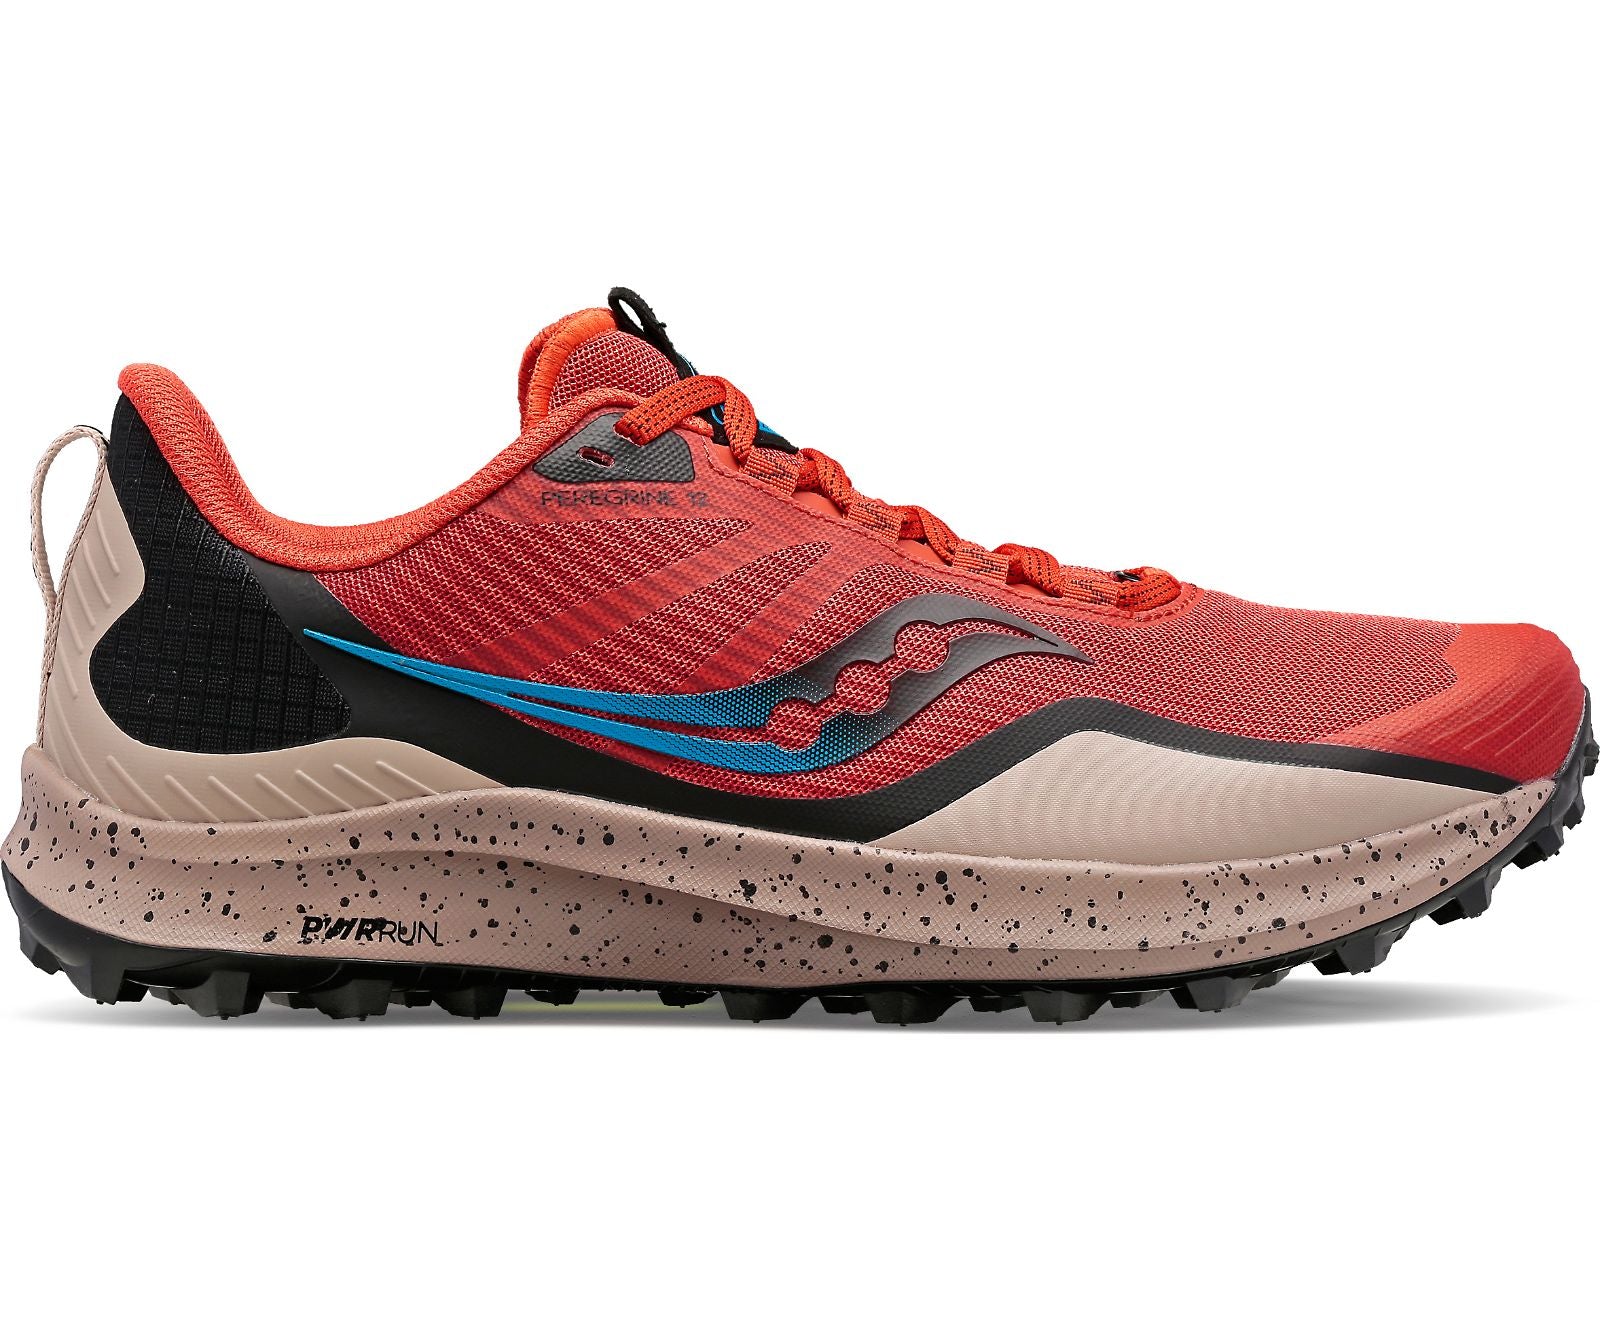 Lateral view of the Men's Peregrine 12 trail shoe by Saucony in the color Clay/Loam